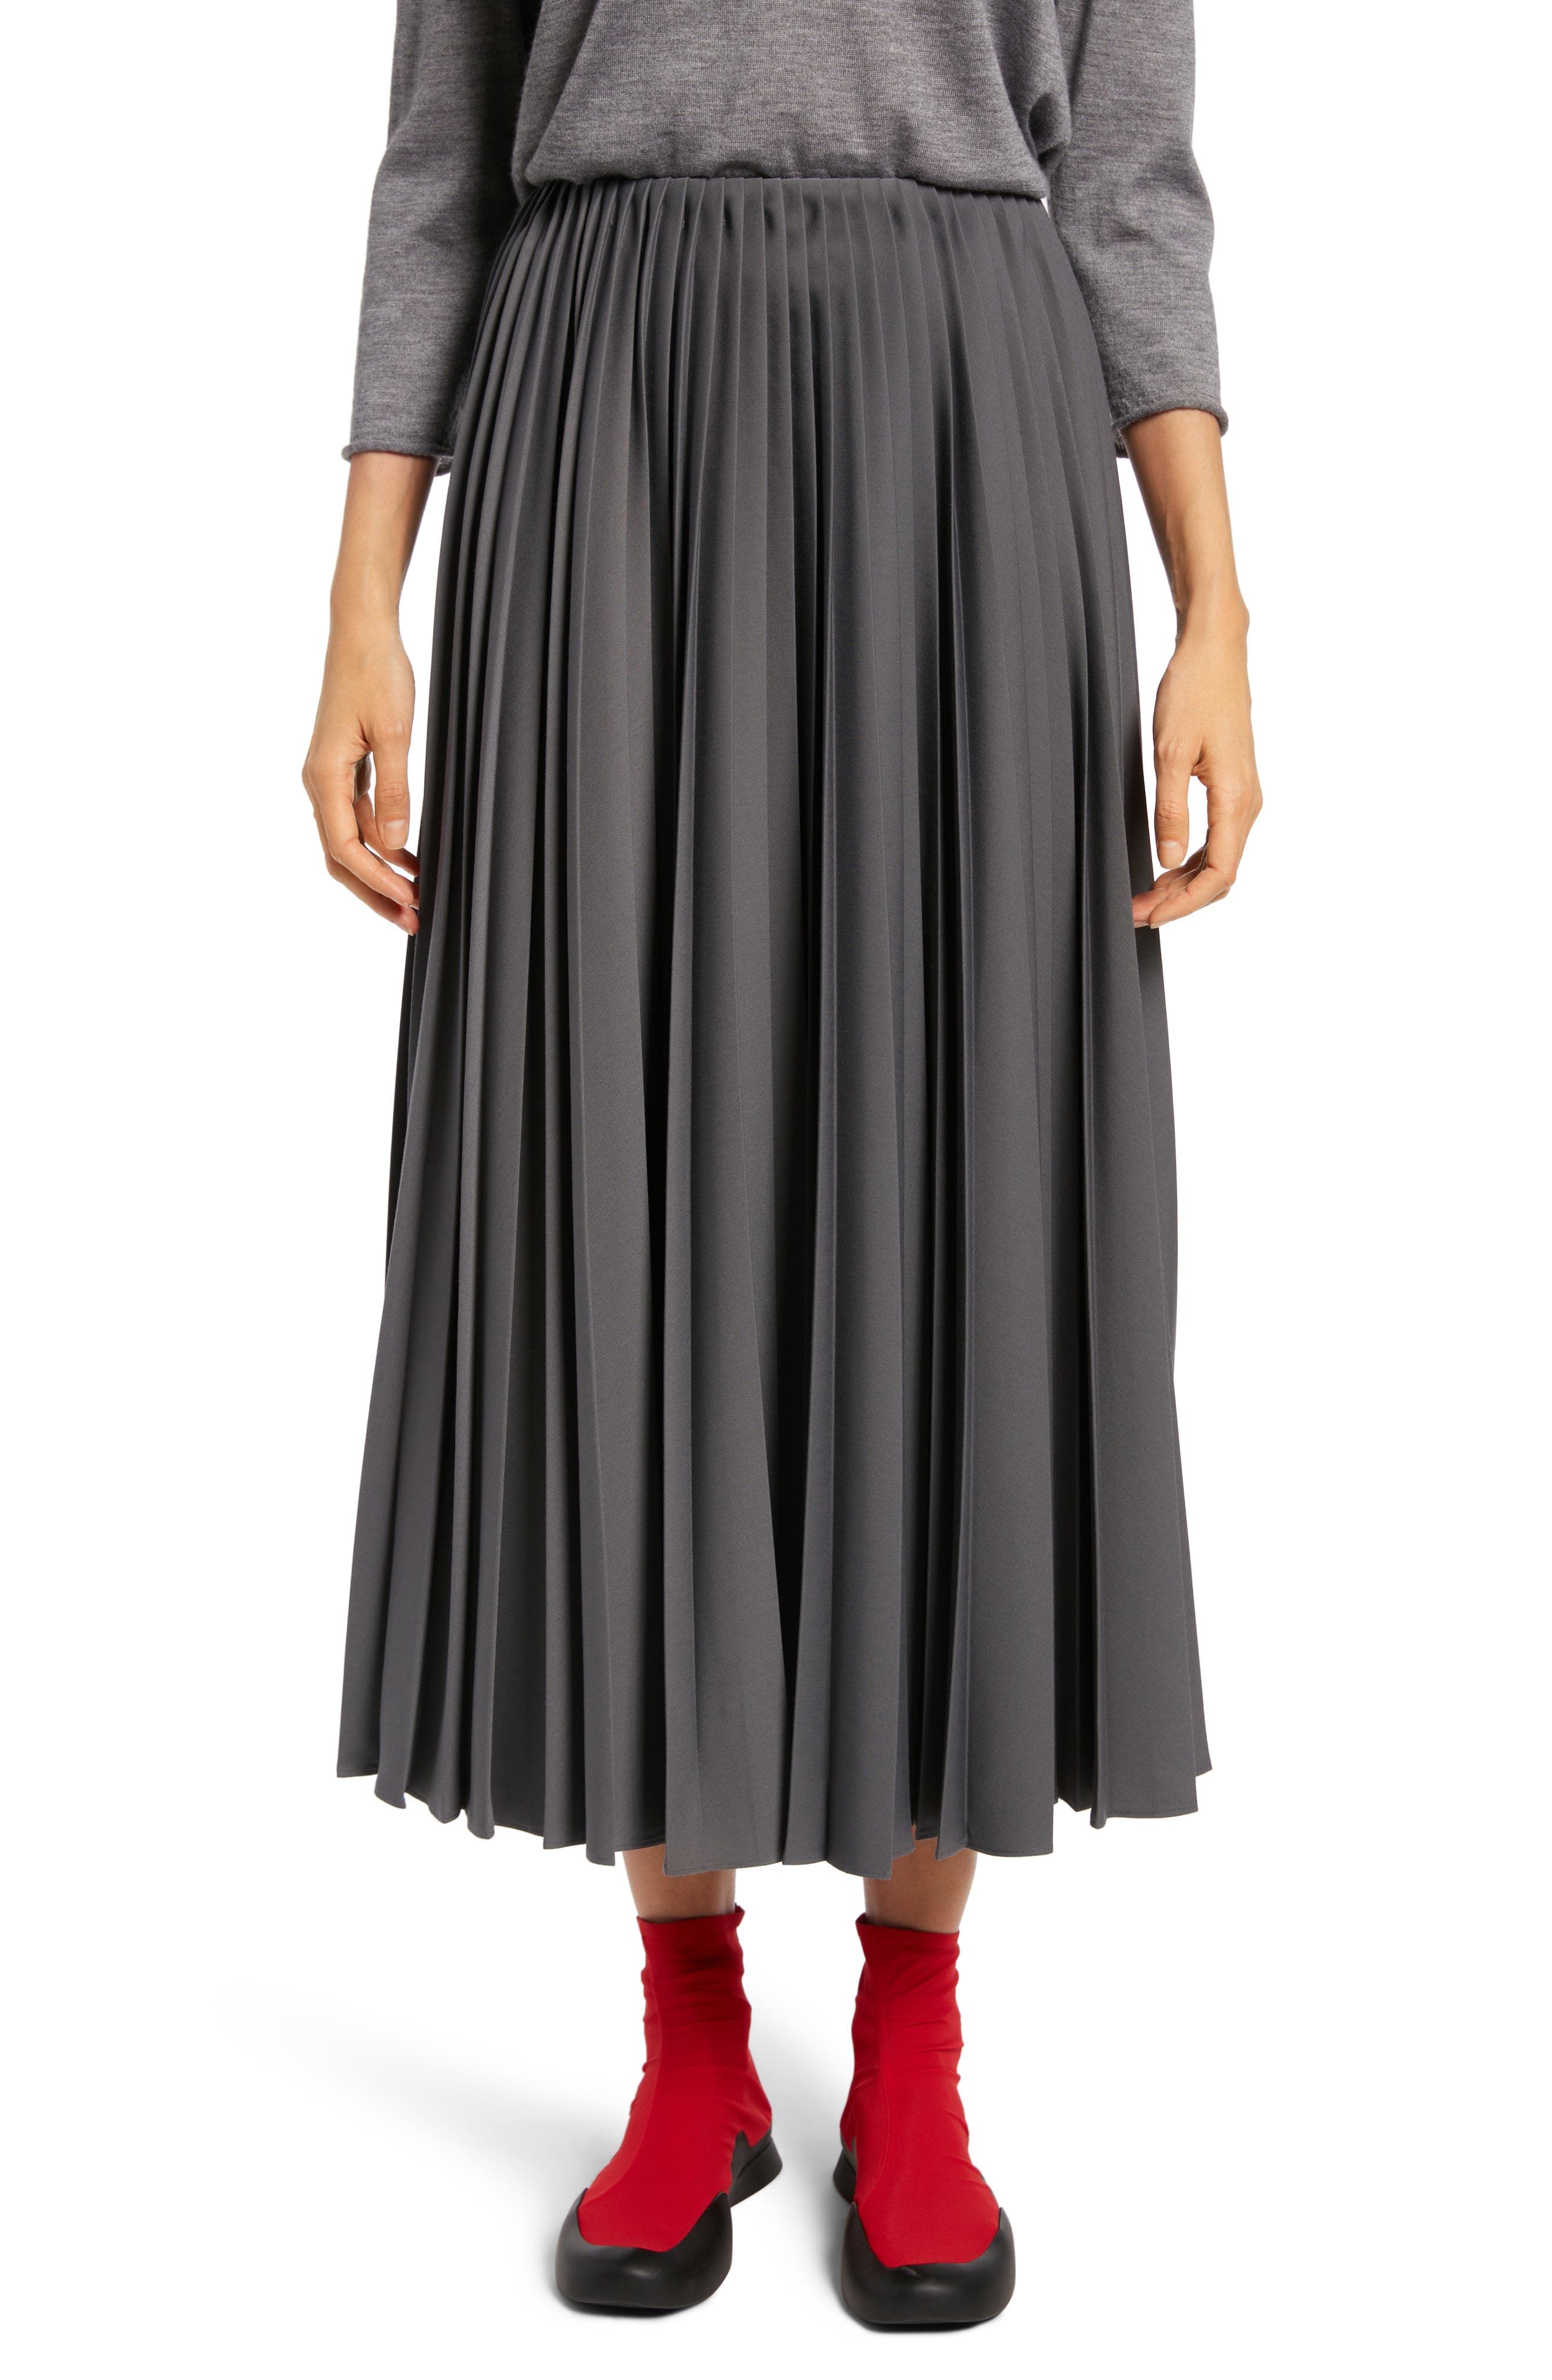 The Row Vinsky Pleated High Waist A-Line Skirt in Concrete at Nordstrom, Size 0